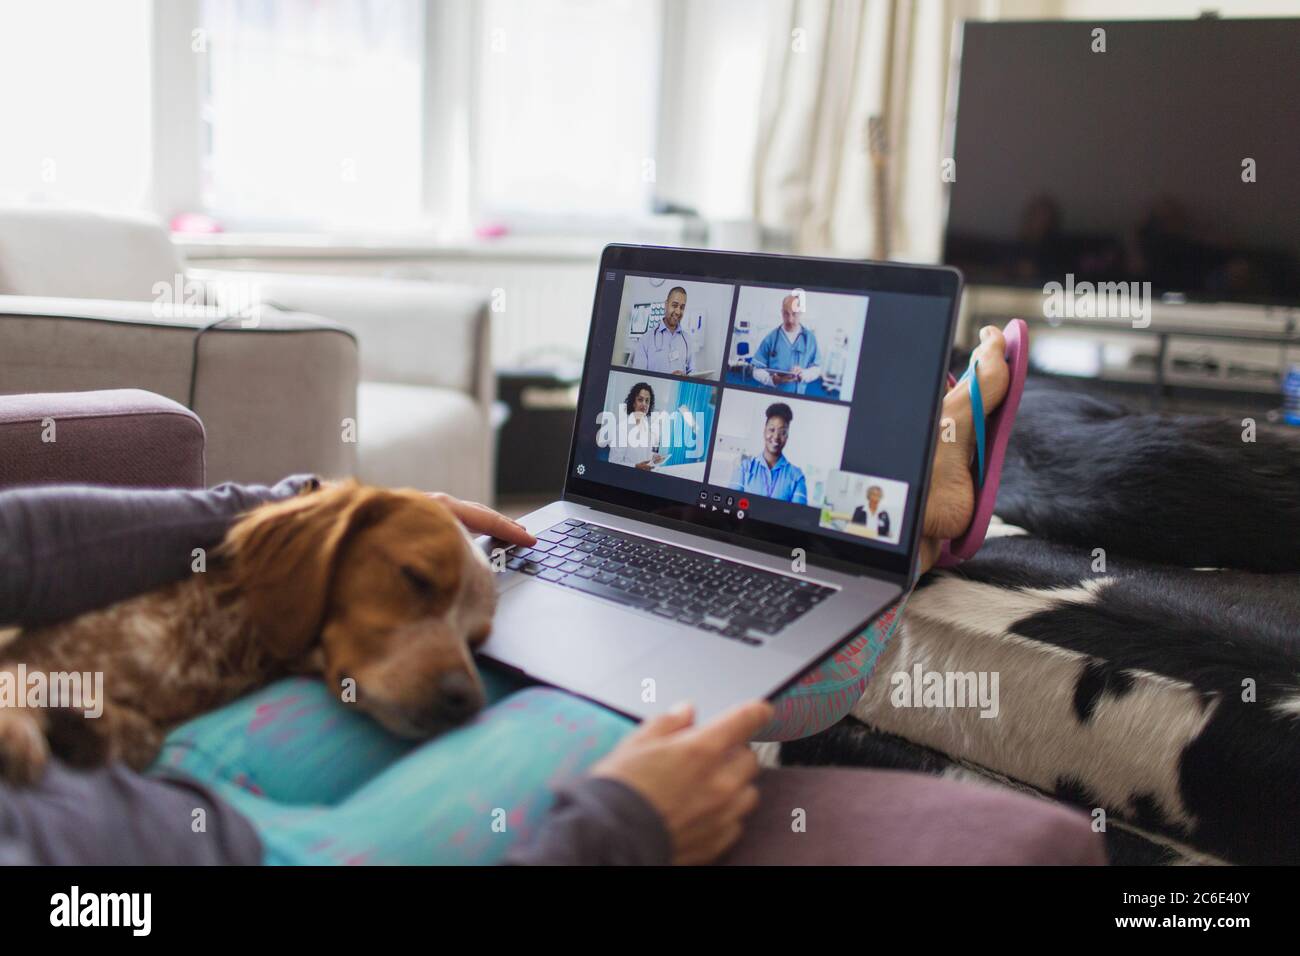 Dog sleeping on woman with laptop video chatting with doctors Stock Photo